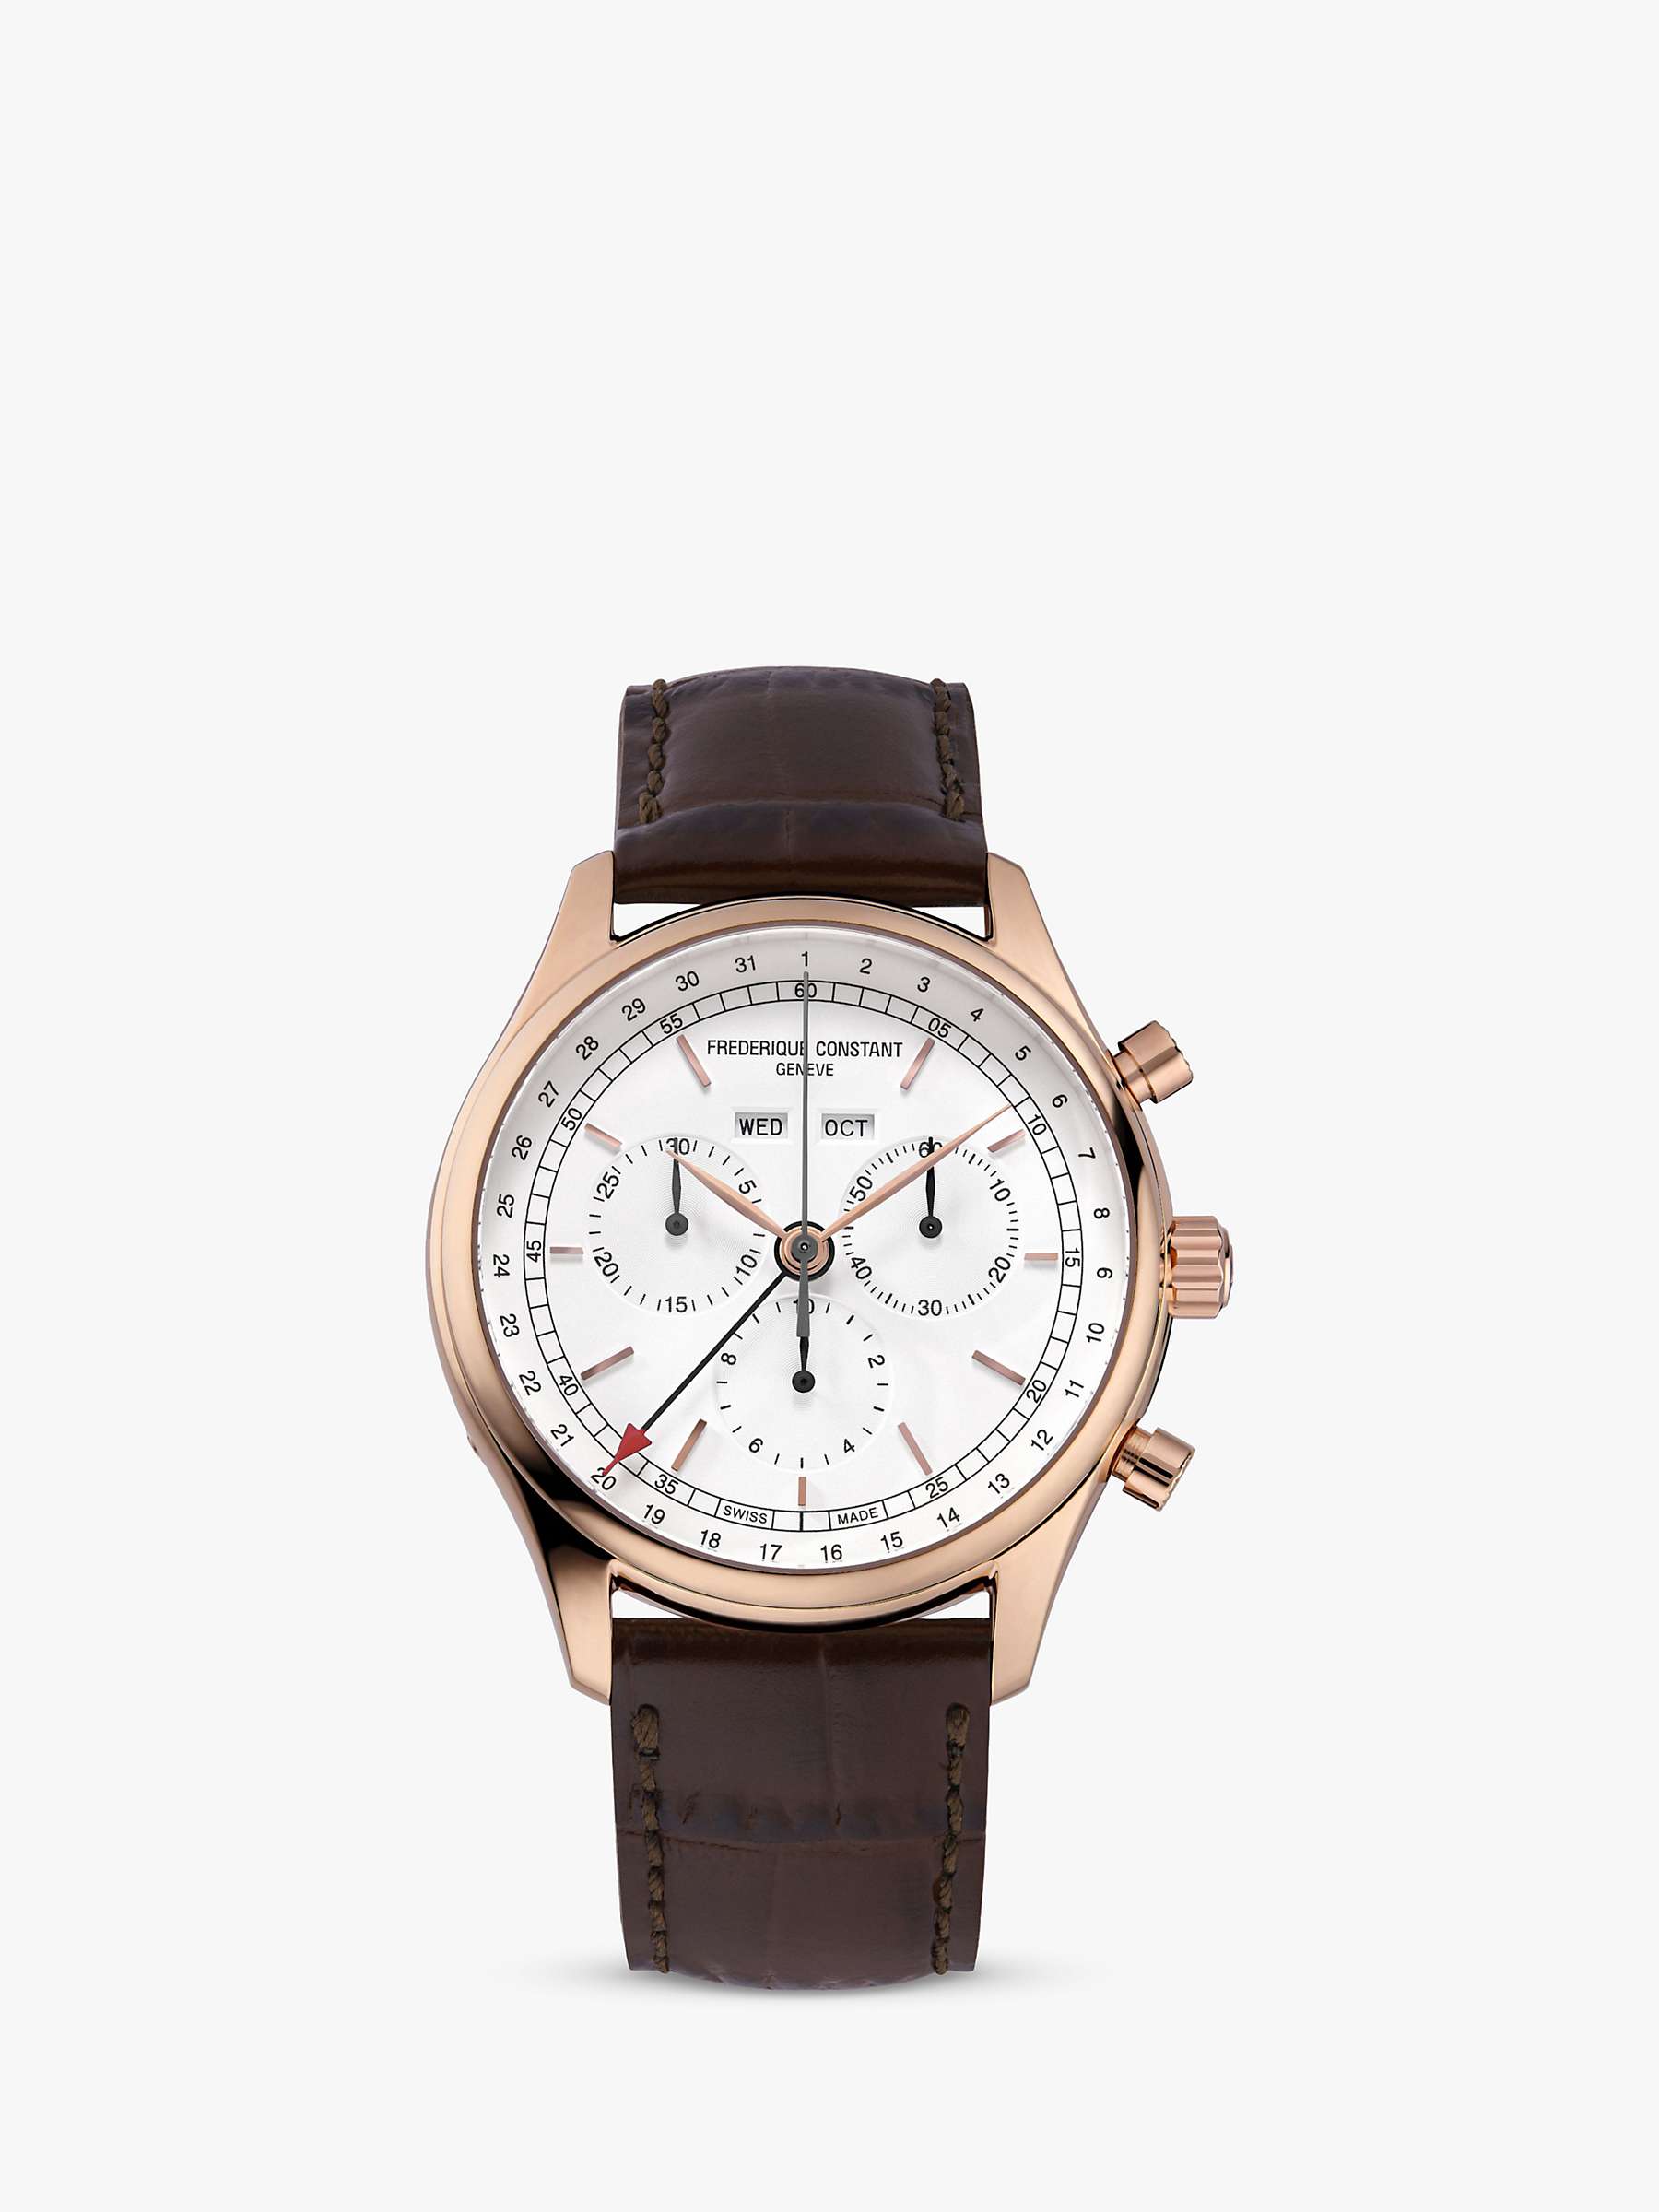 Buy Frederique Constant FC-296SW5B4 Men's Classic Chronograph Leather Strap Watch, Brown/White Online at johnlewis.com